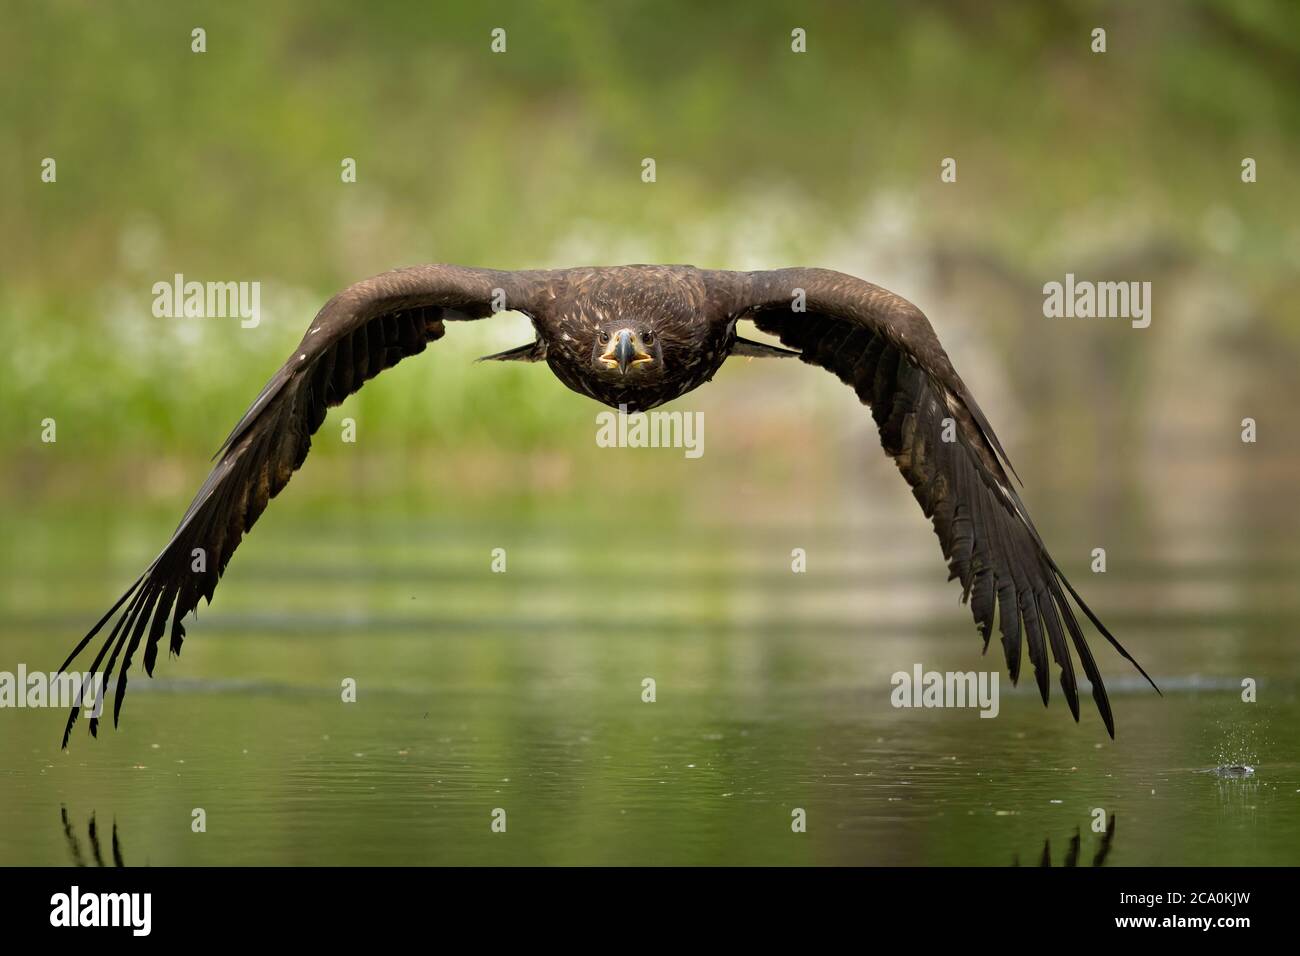 White-tailed eagle (Haliaeetus albicilla) is a very large species of sea eagle widely distributed across temperate Eurasia. Stock Photo